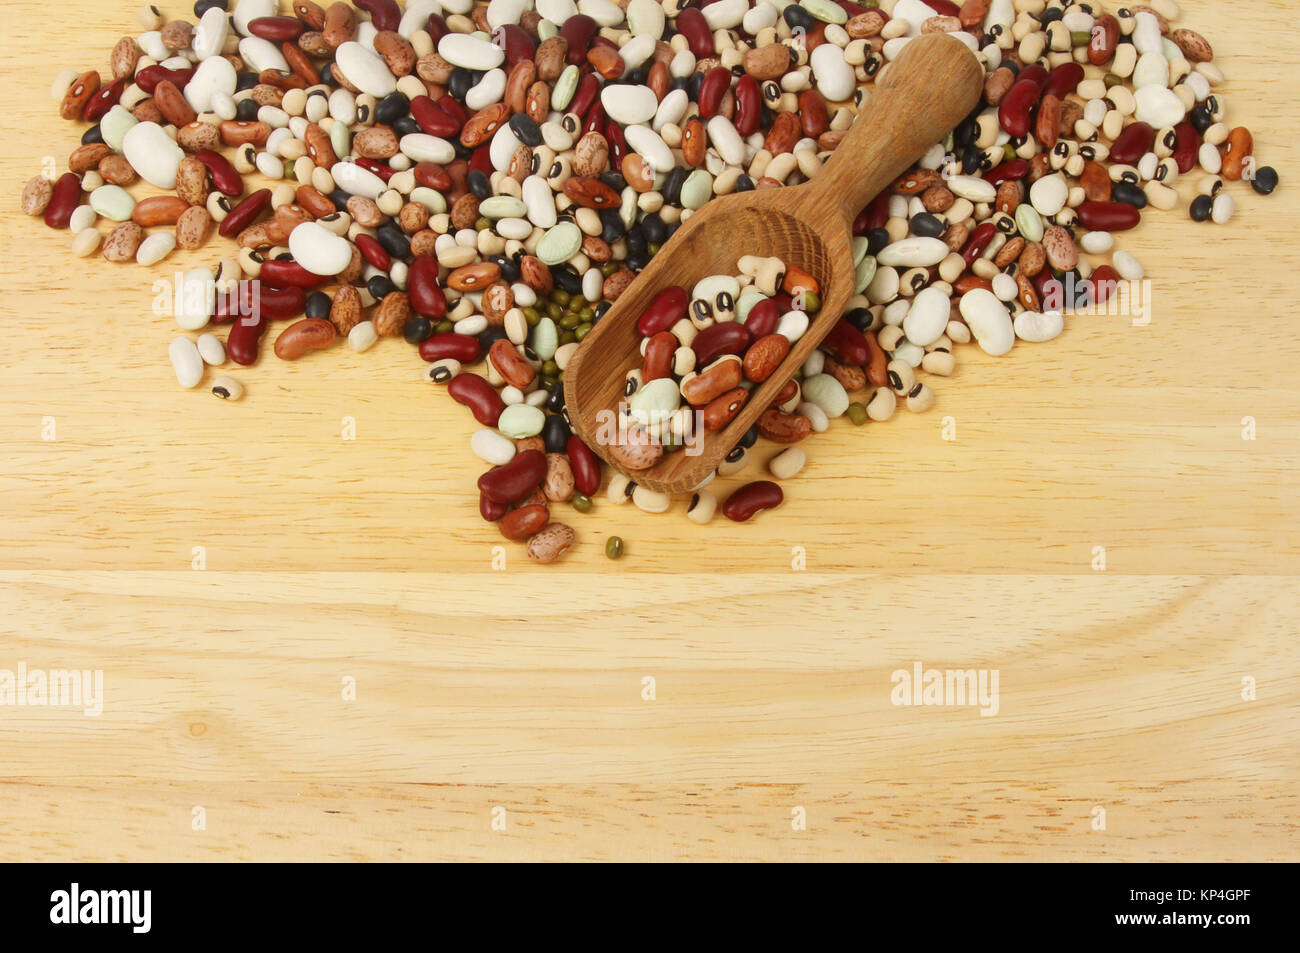 Ten dried bean mix with a wooden scoop on a chopping board with copy space below Stock Photo